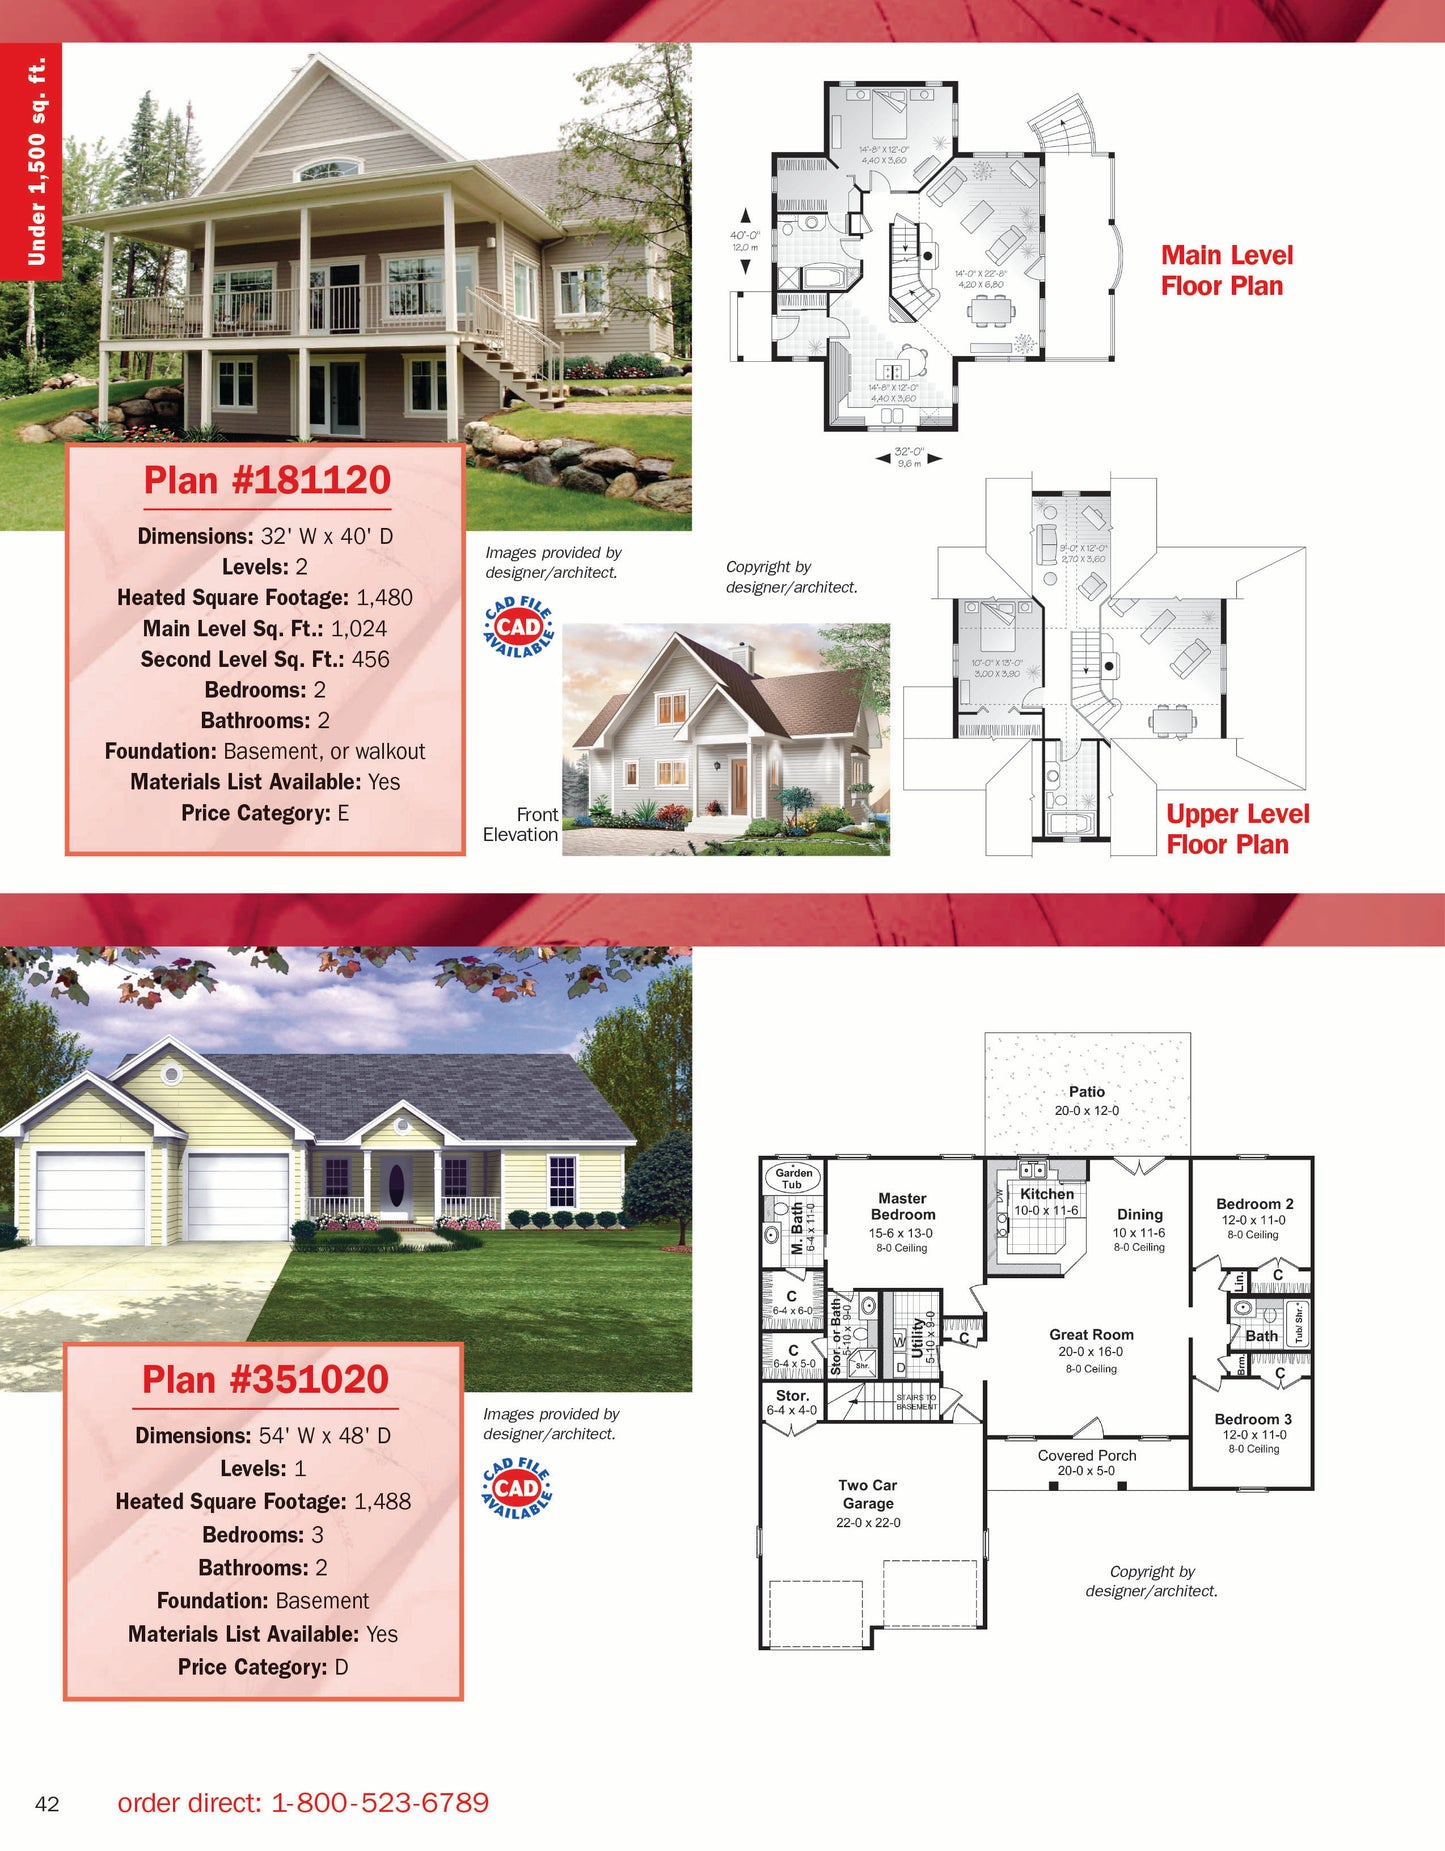 Lowe's Best-Selling House Plans - Use #7616